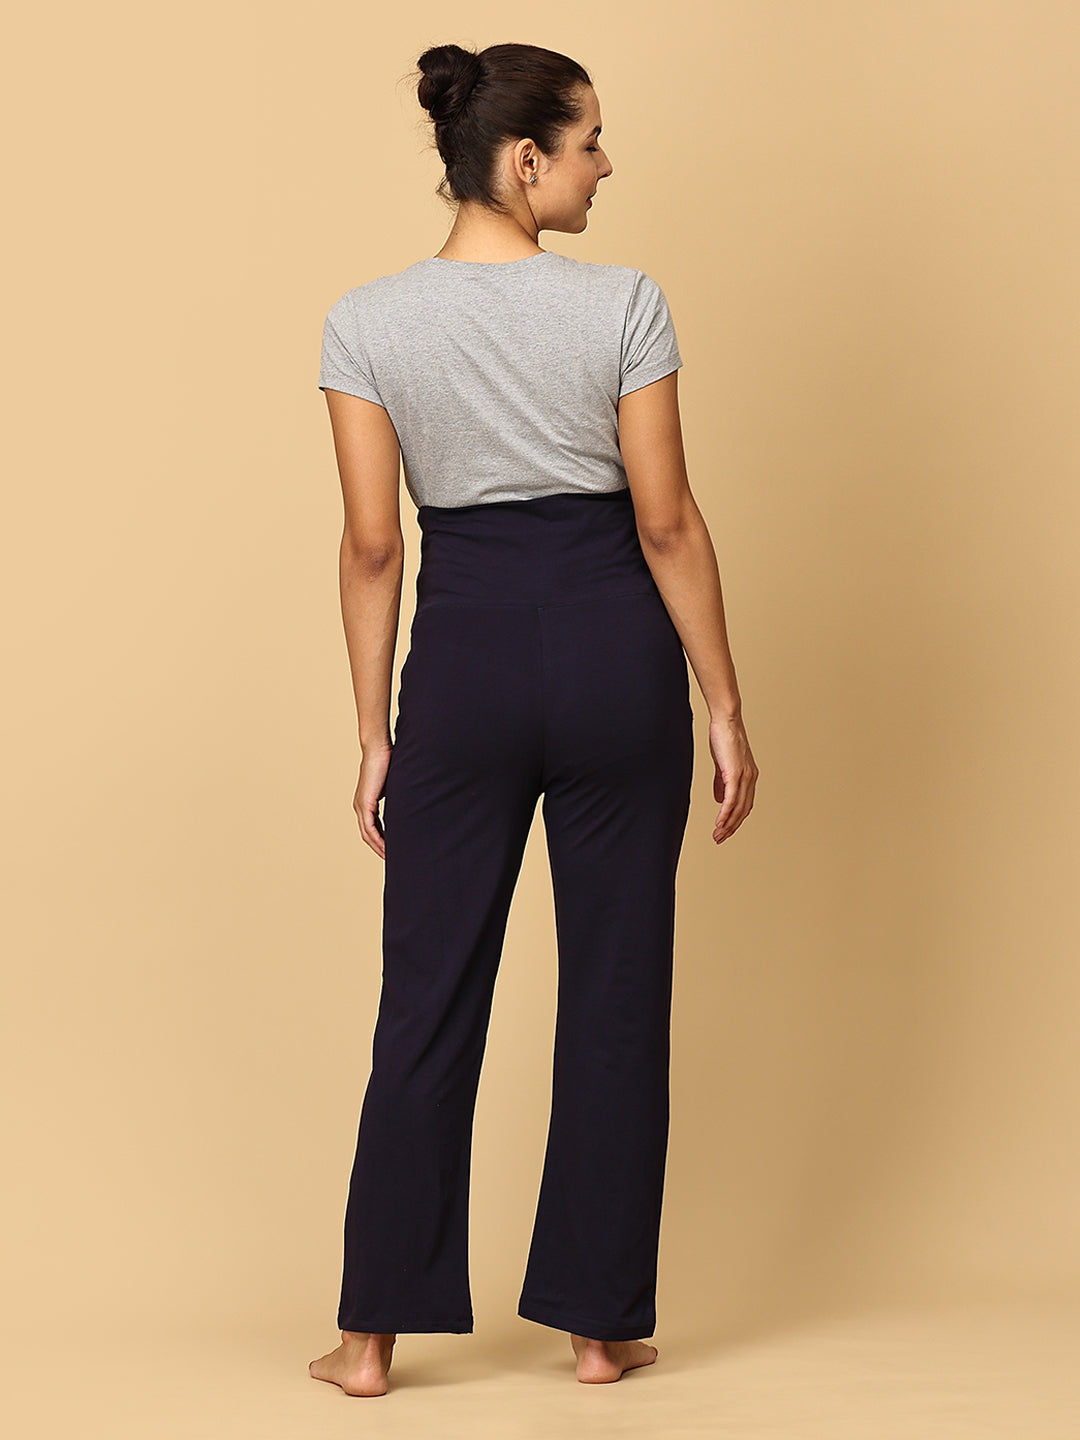 Comfy Maternity Trackpants - Navy Blue